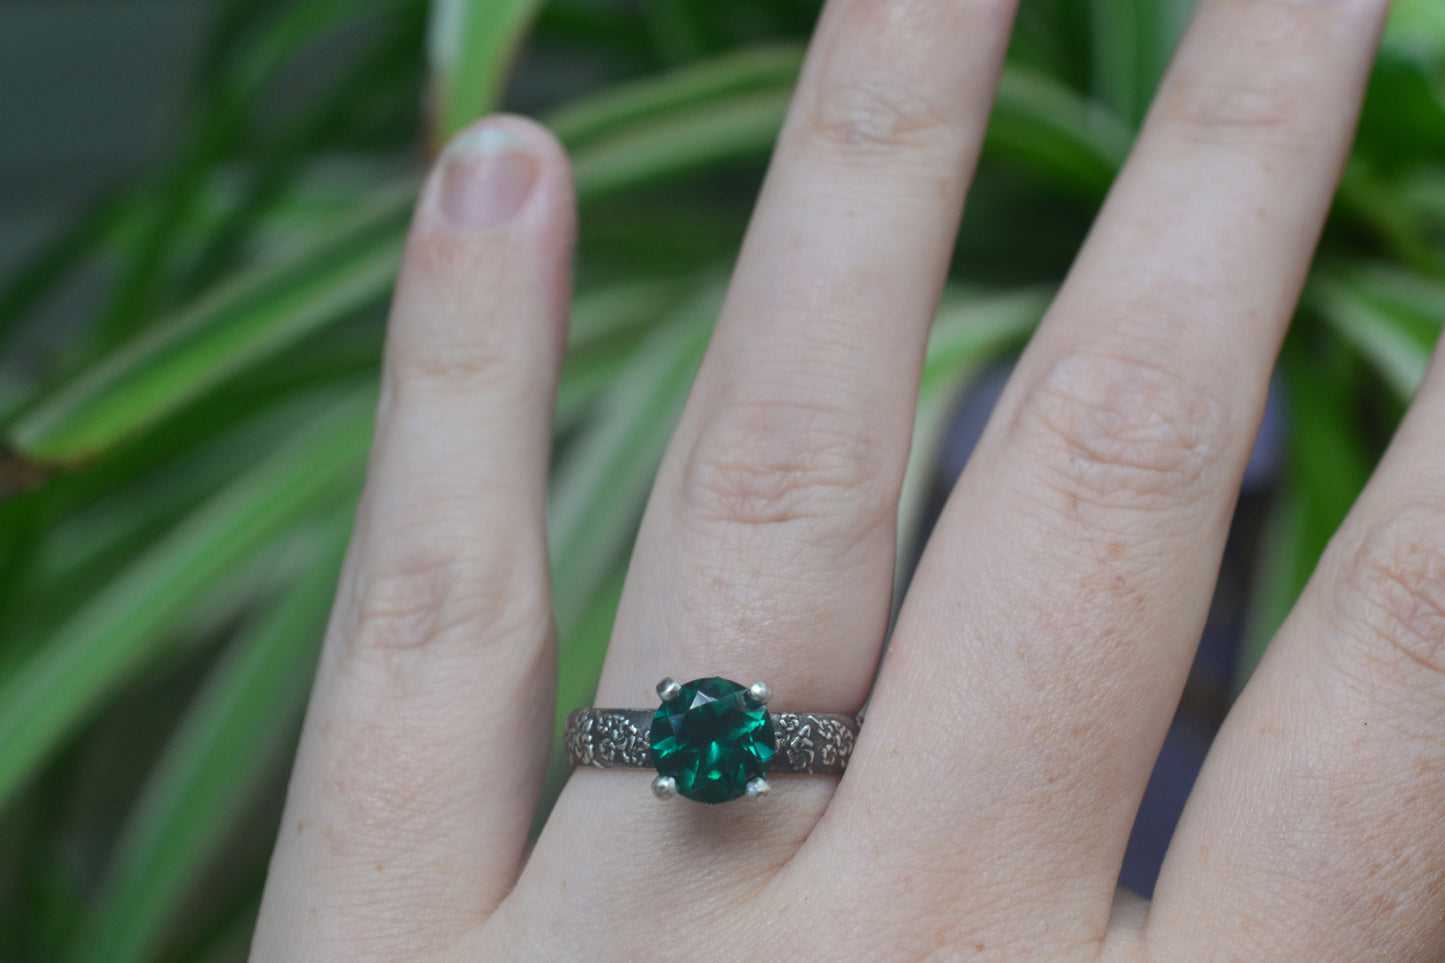 Gothic Blossom Emerald Engagement Ring in Silver